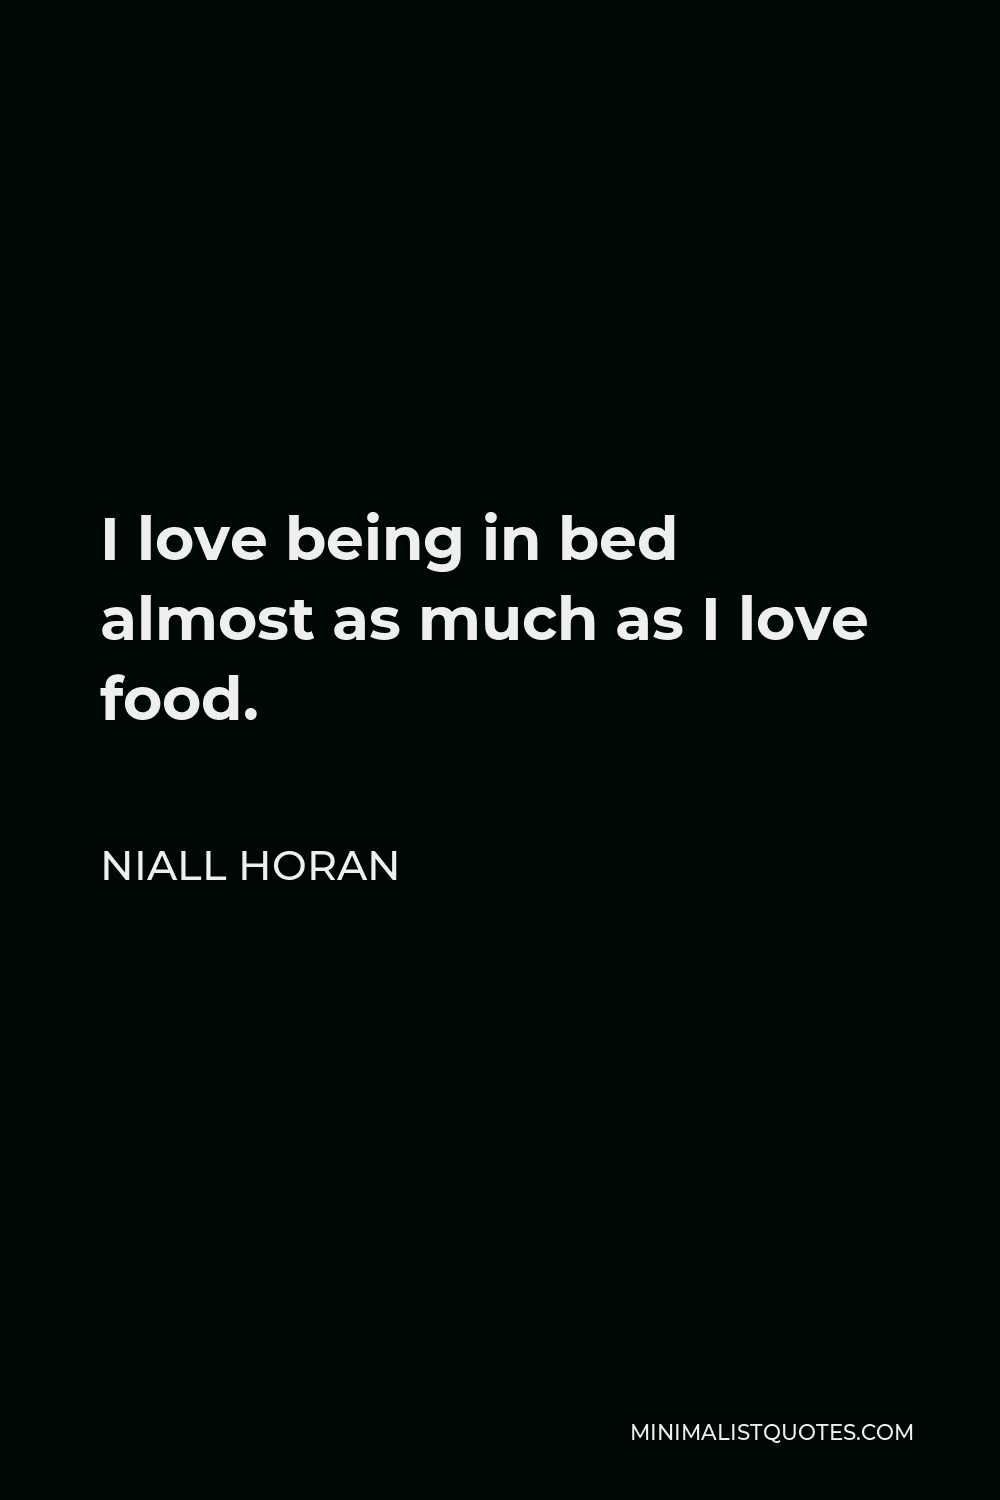 Niall Horan Quote - I love being in bed almost as much as I love food.